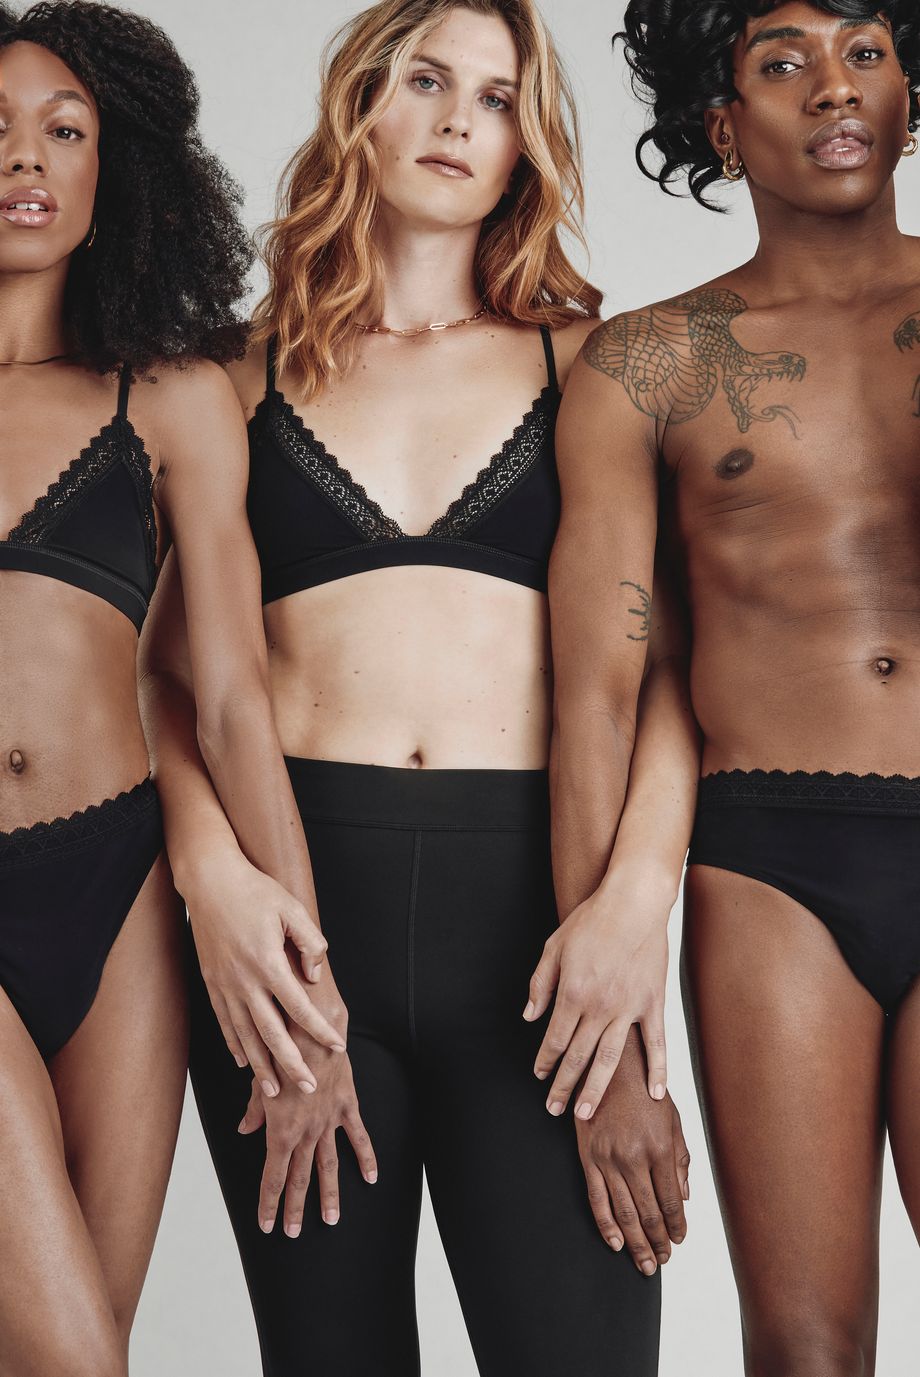 Lingerie chain Bravissimo now allows people who identify as transgender to  try on bras in the changing rooms – The US Sun